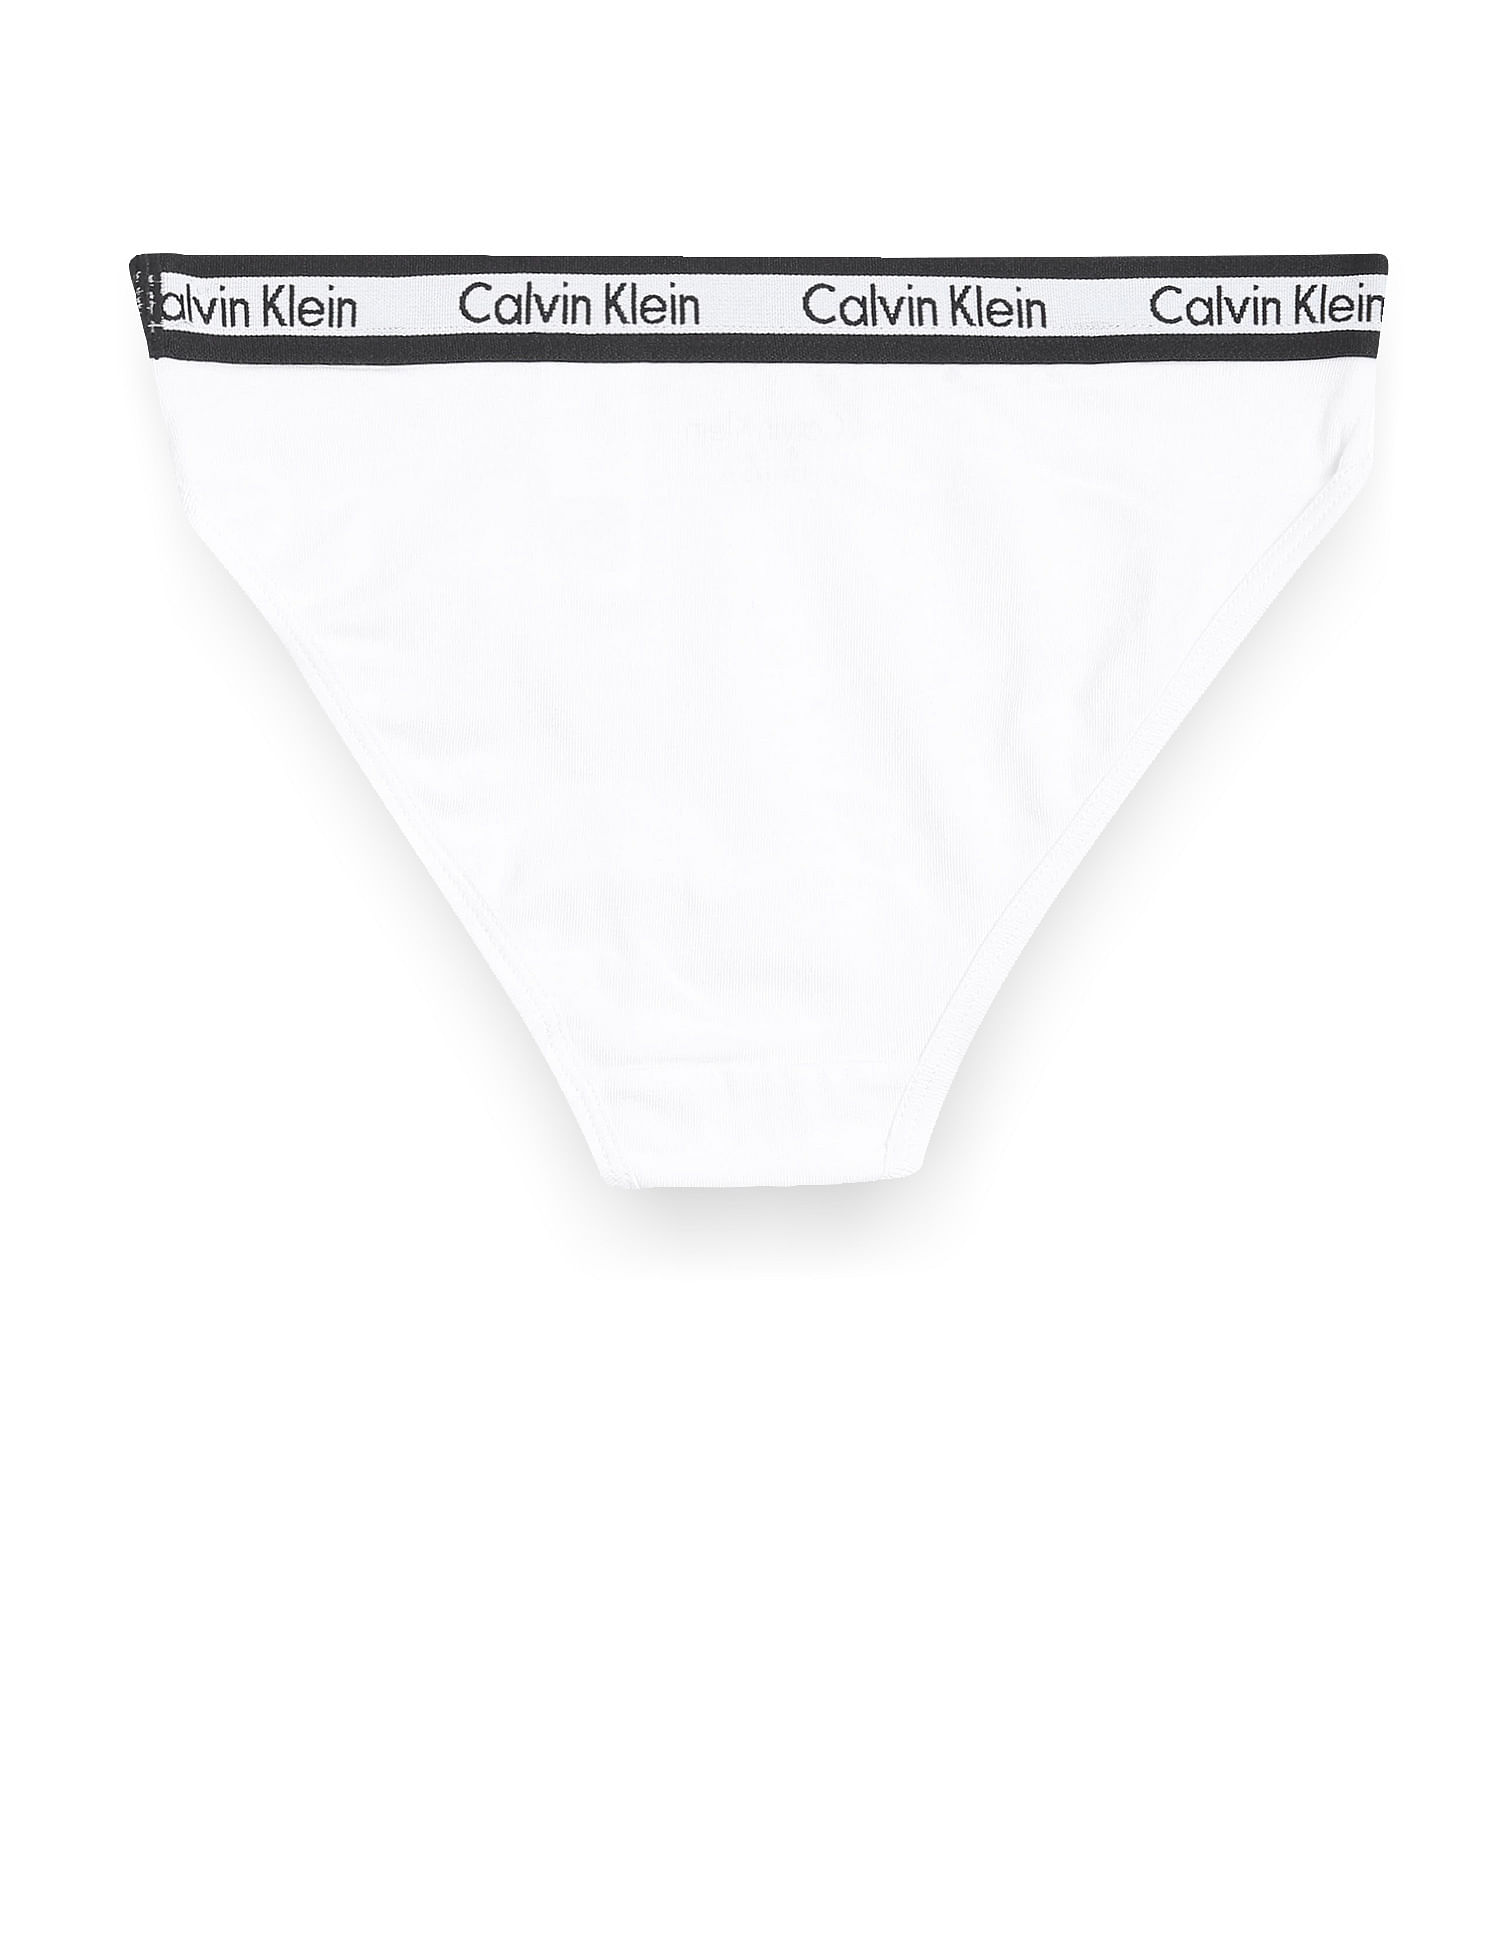 Calvin Klein 2 pack thong in hot pink/gray